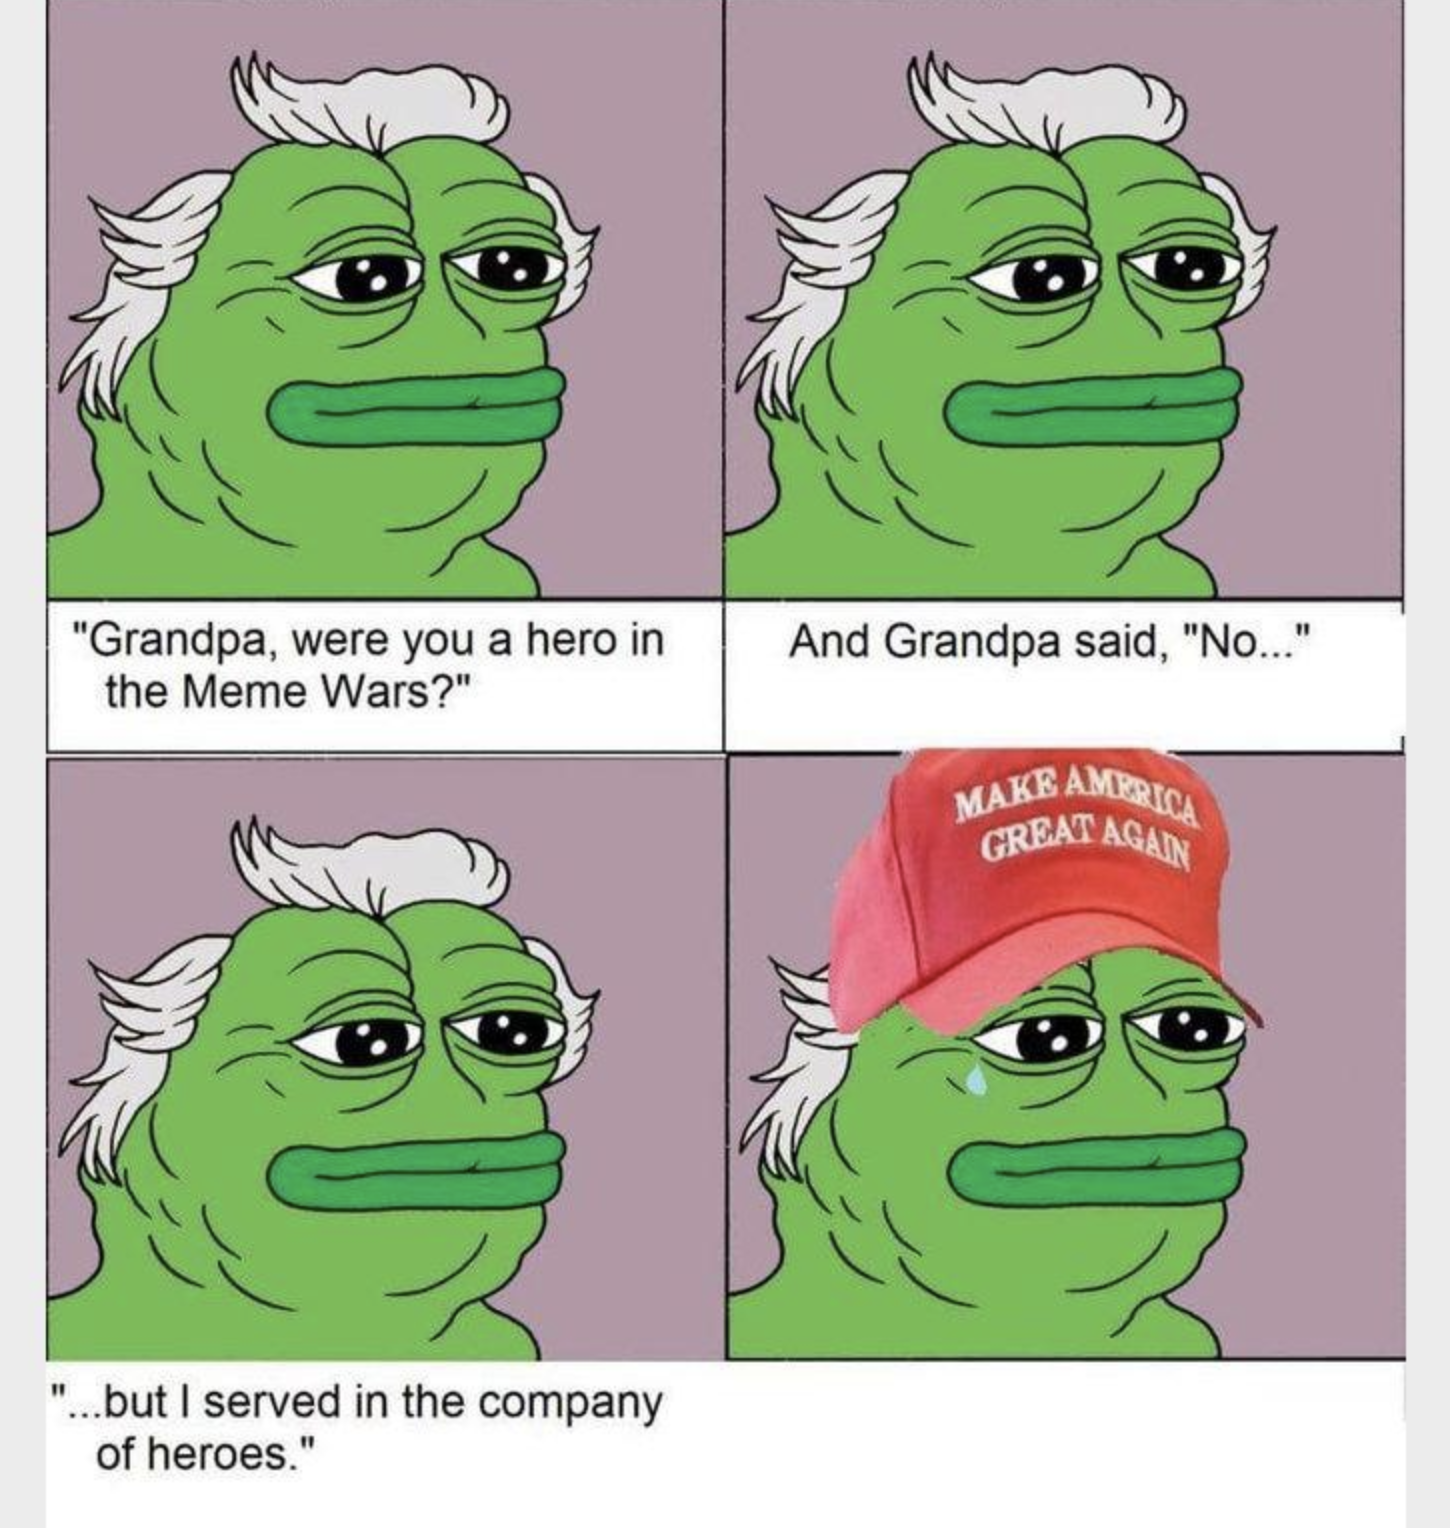 Pepe the Frog has been used in peaceful and hateful memes.